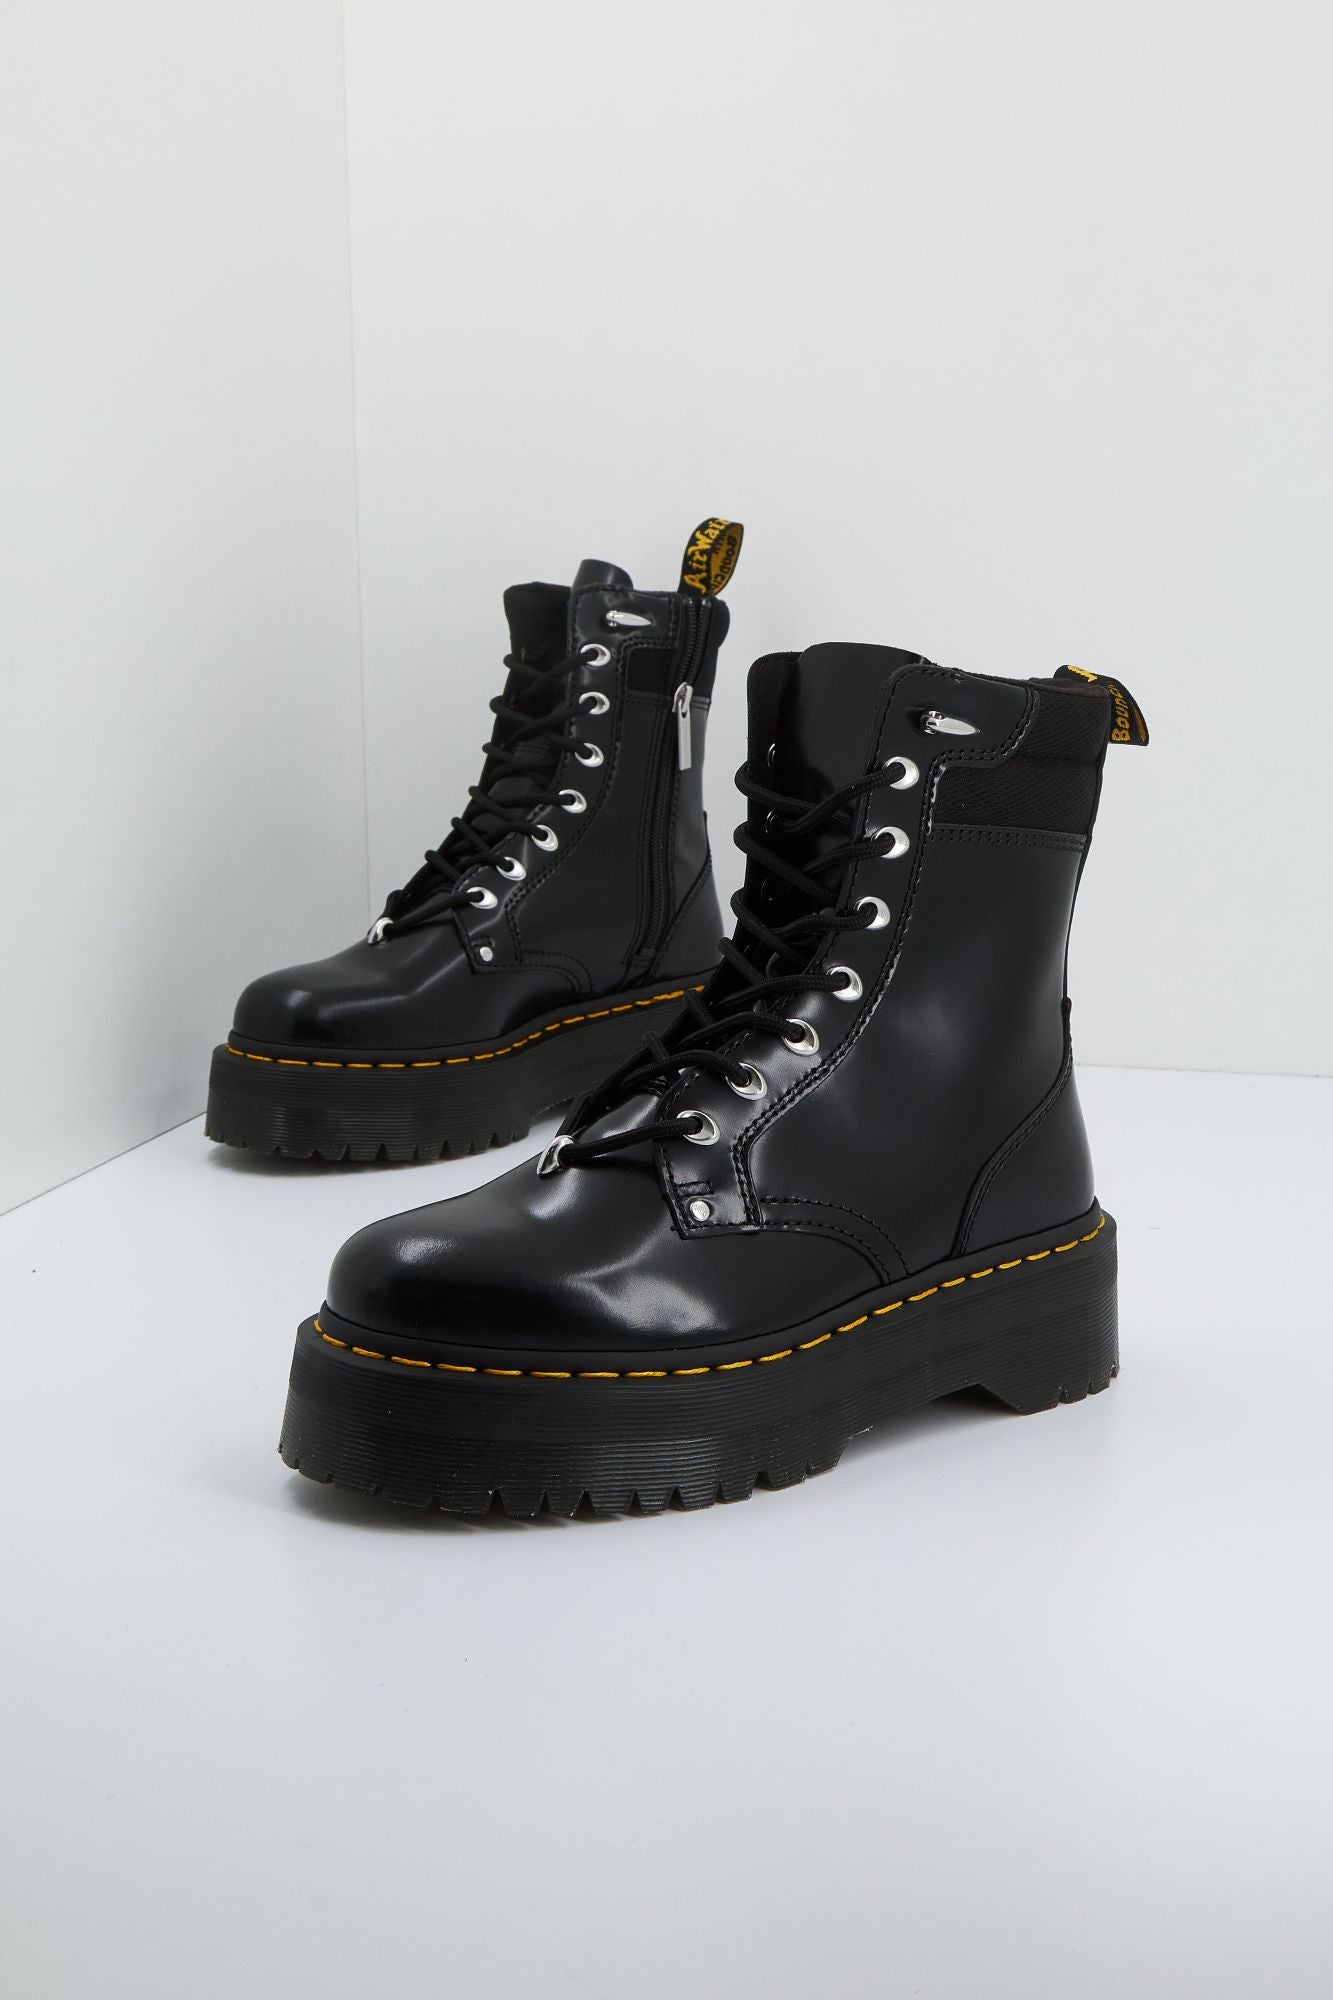 Women's ankle boots online at YellowShop – Yellowshop